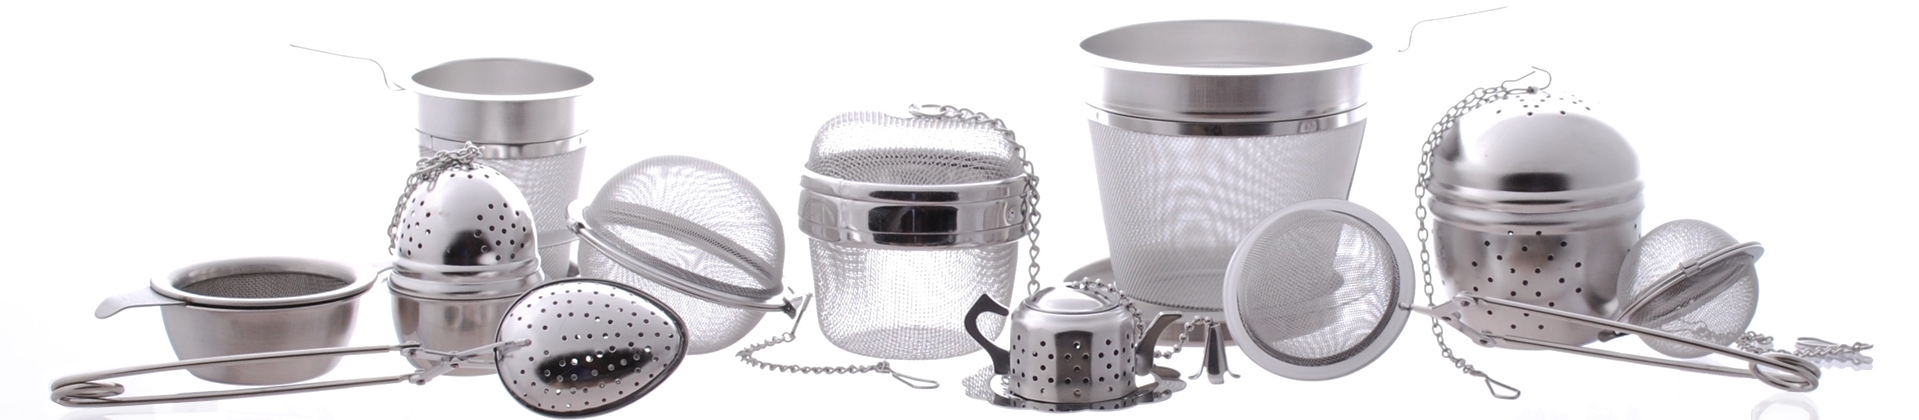 Tea Infusers, Strainers & Filters